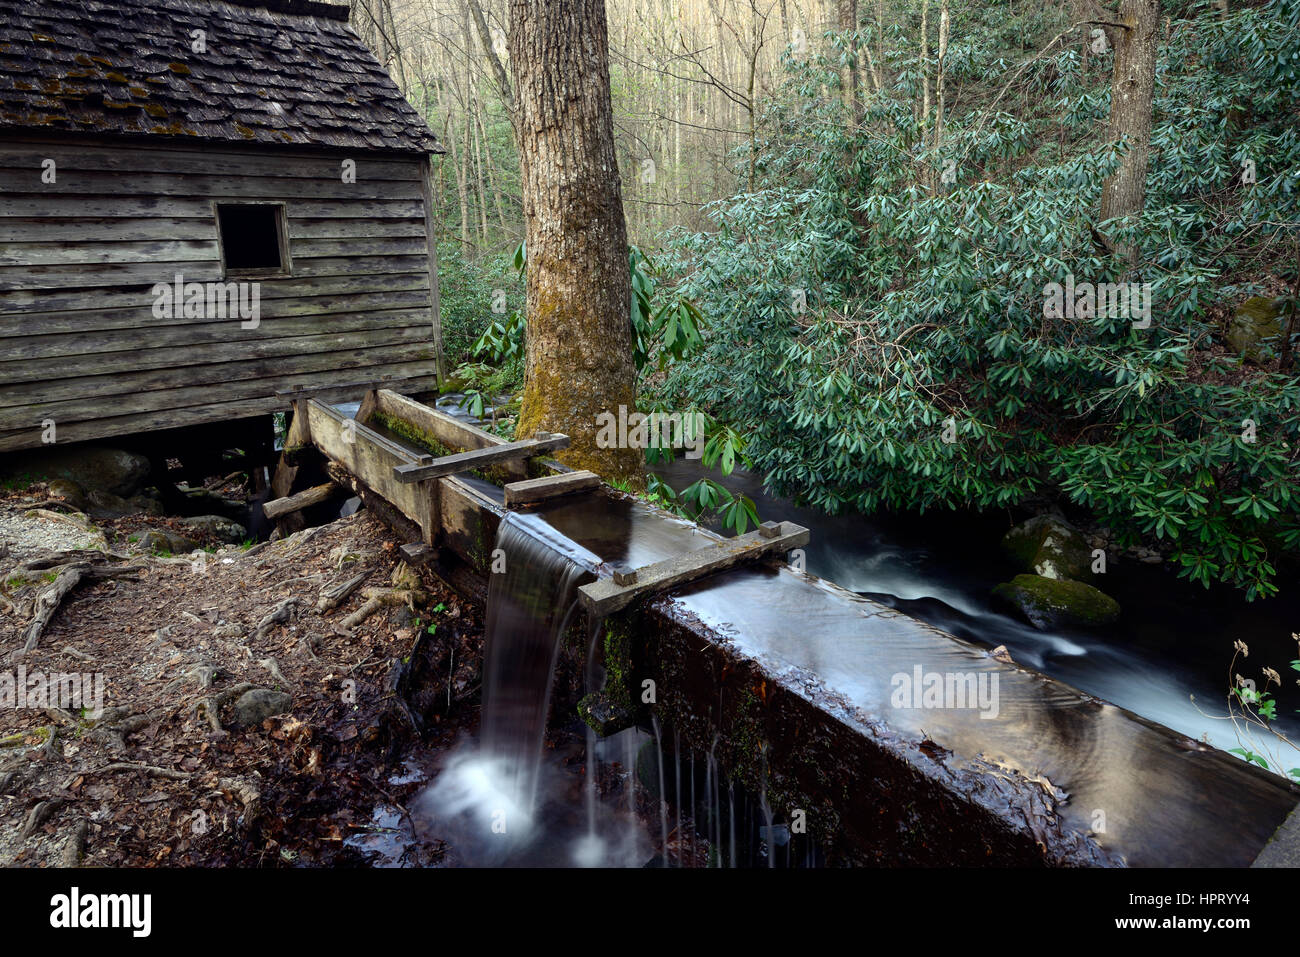 The Reagan Grist Mill, water power, water powered, mills, tub-wheel turbine, flume redirecting water, grindstone, log cabins, cottage, homestead, hous Stock Photo